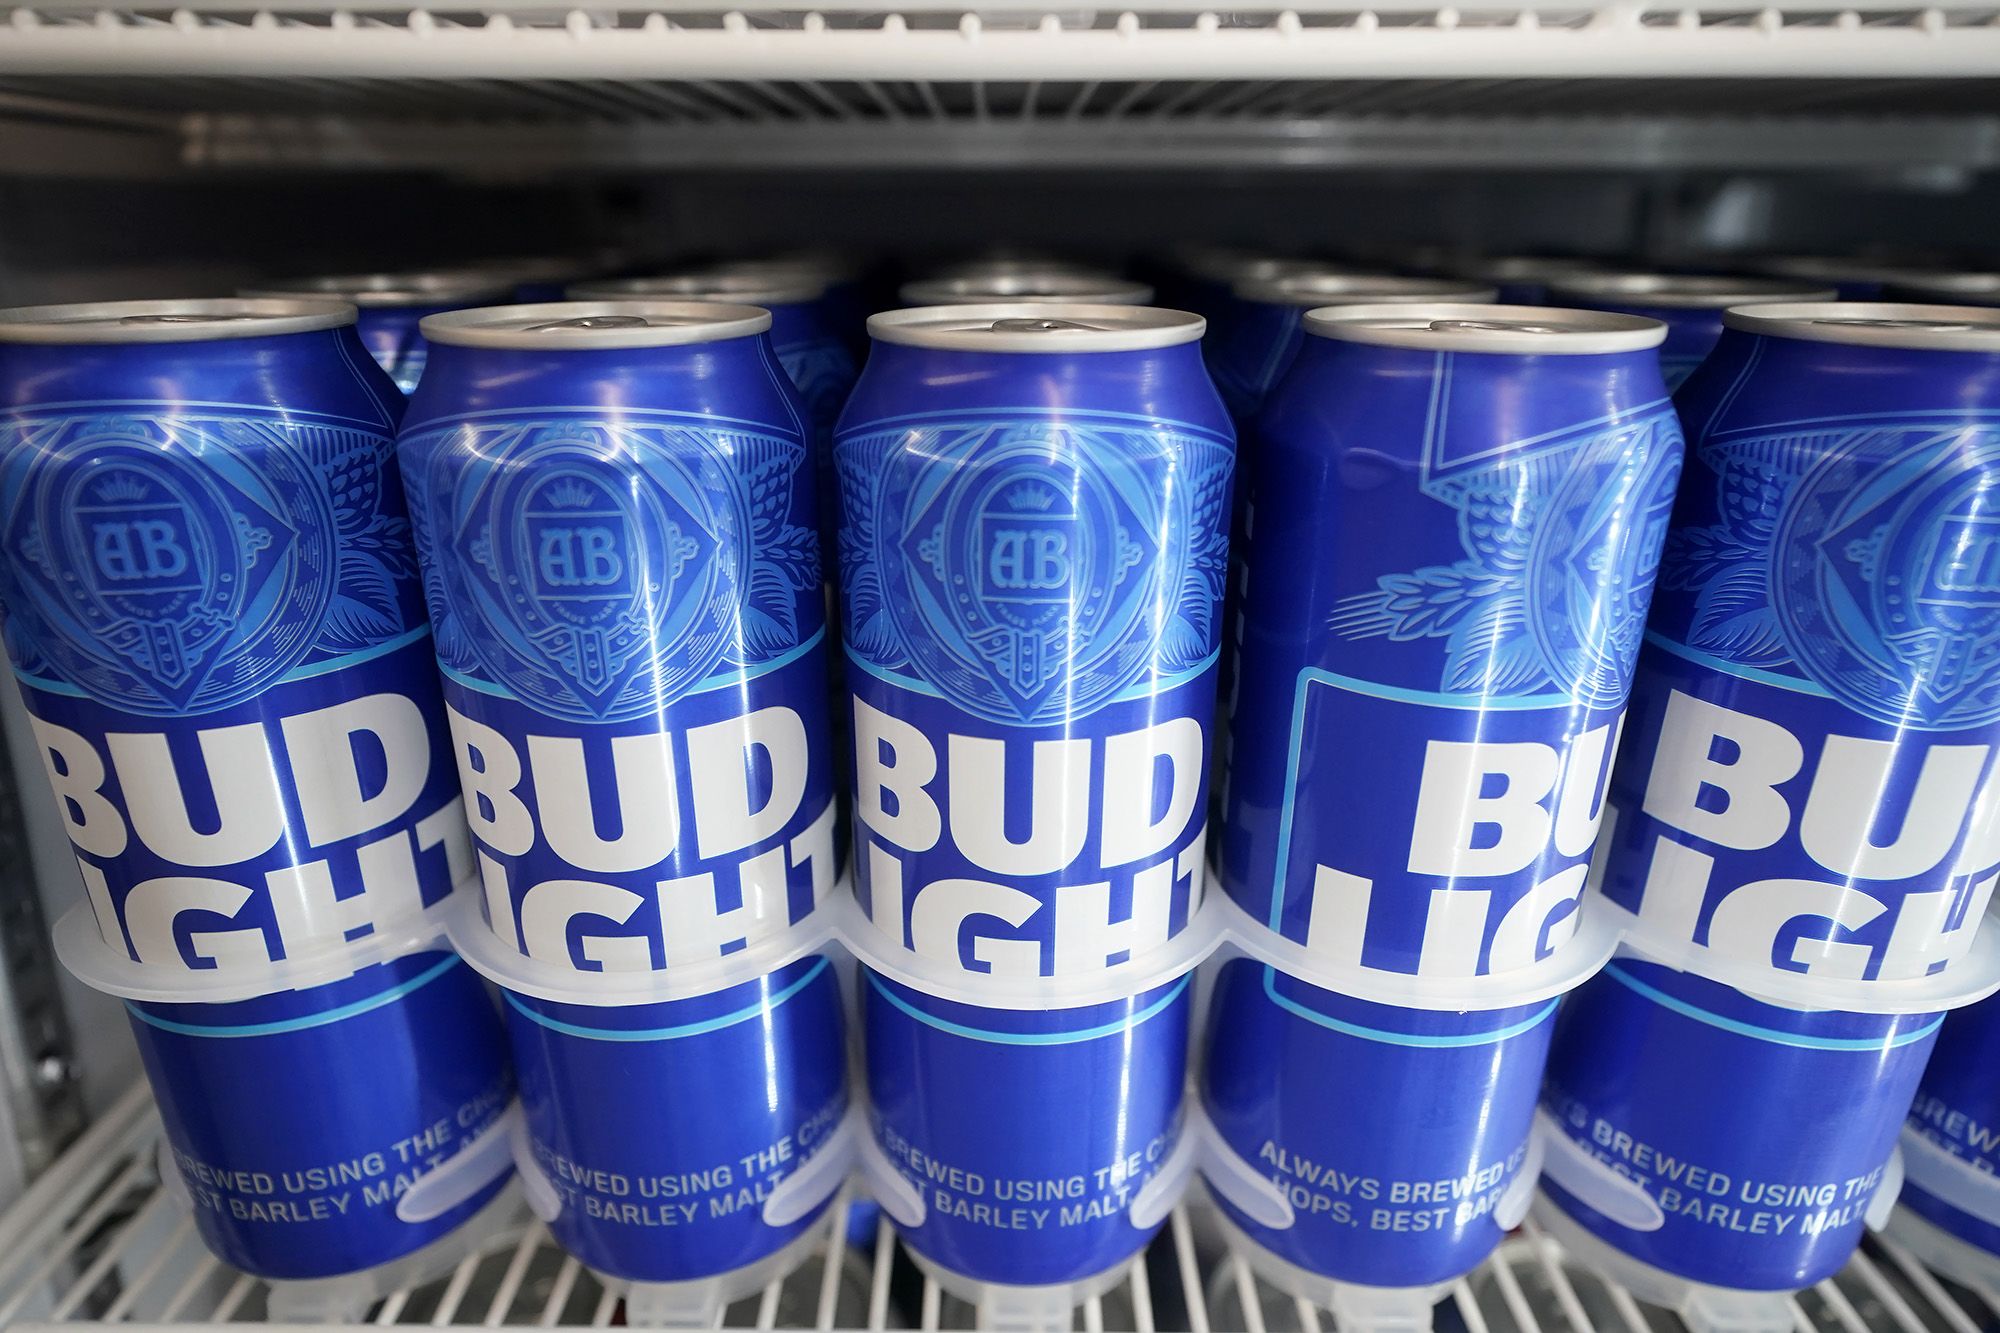 Bud Light loses its title as America's top-selling beer to Modelo Especial